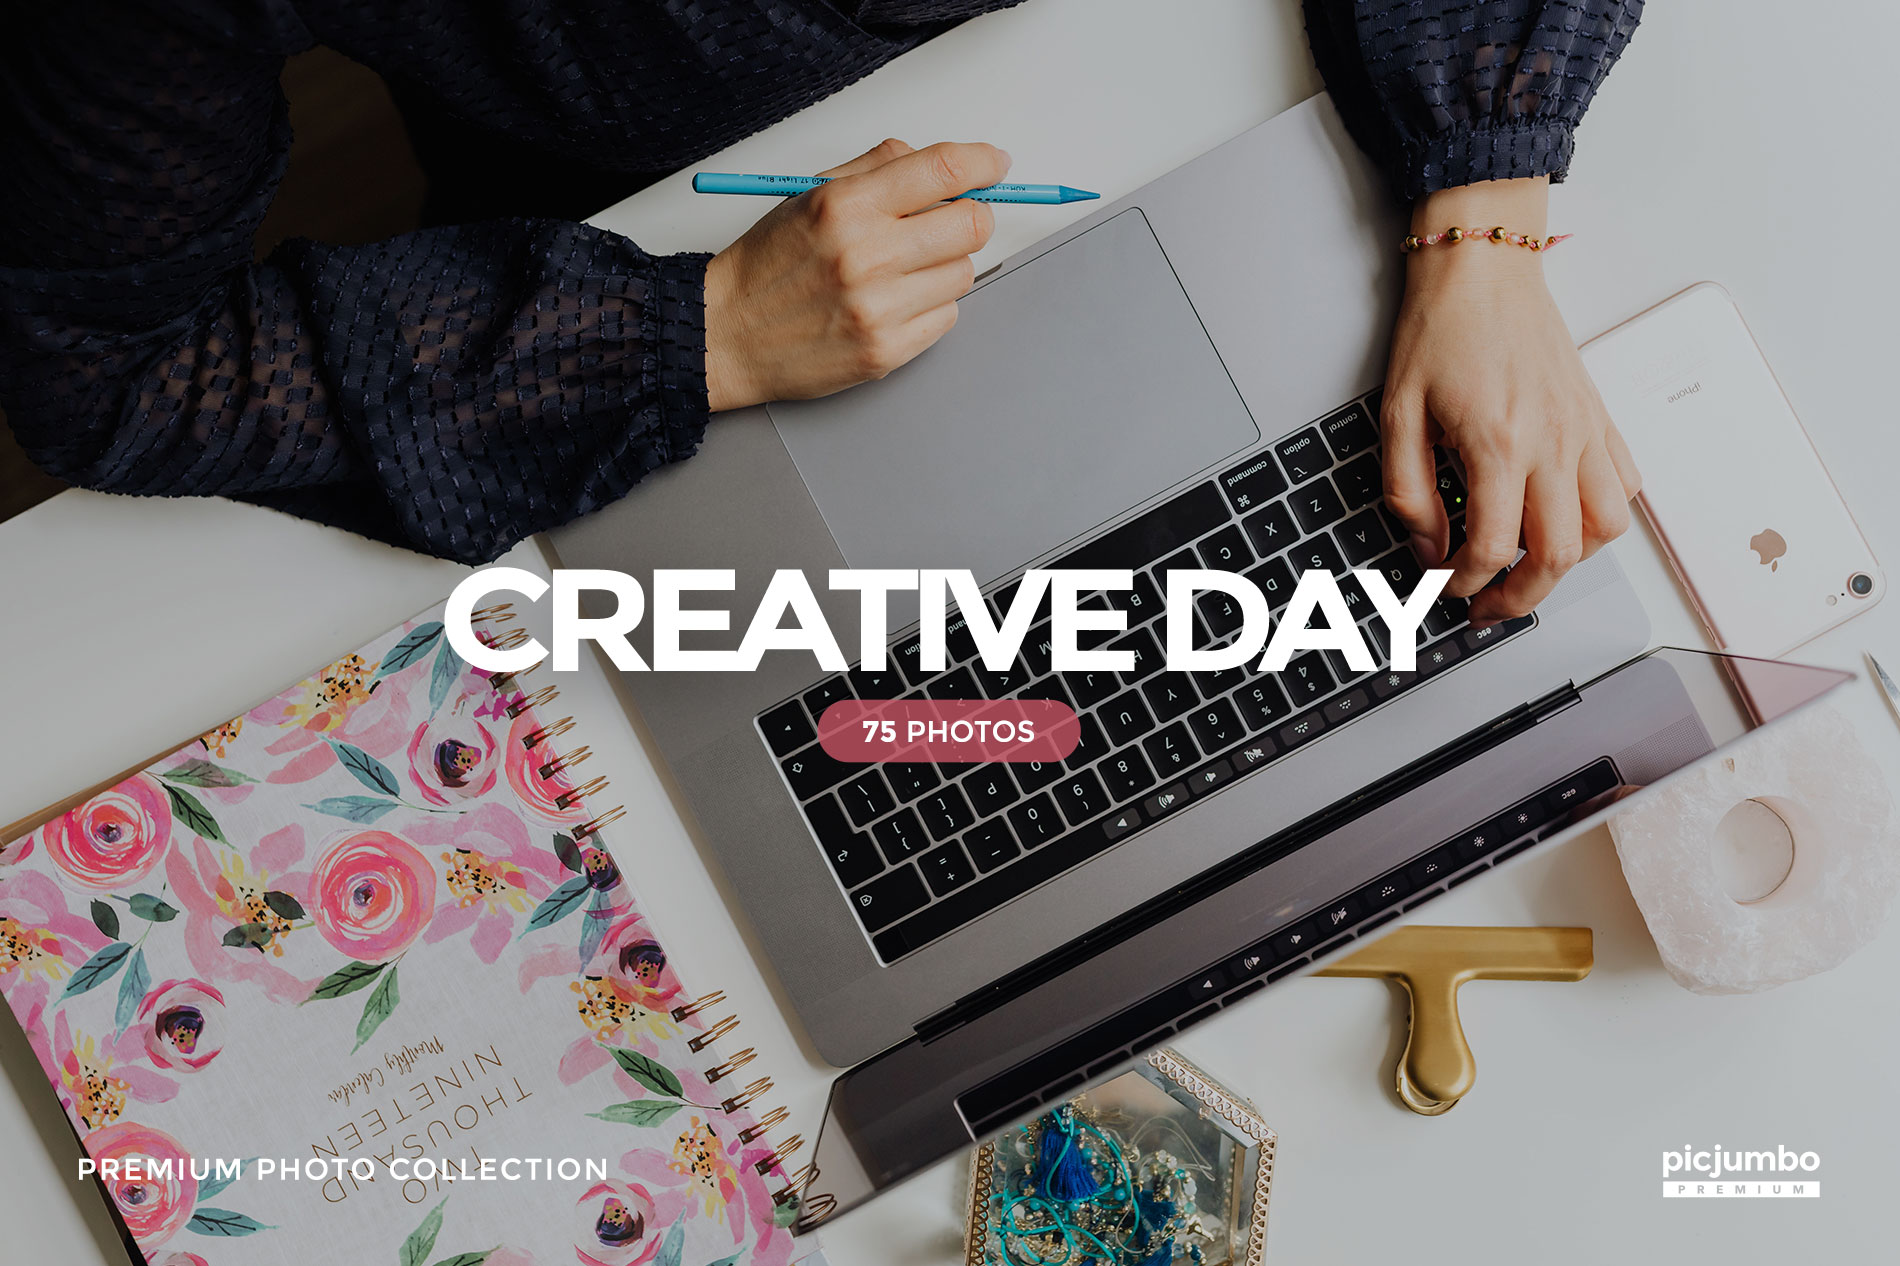 Download hi-res stock photos from our Creative Day PREMIUM Collection!